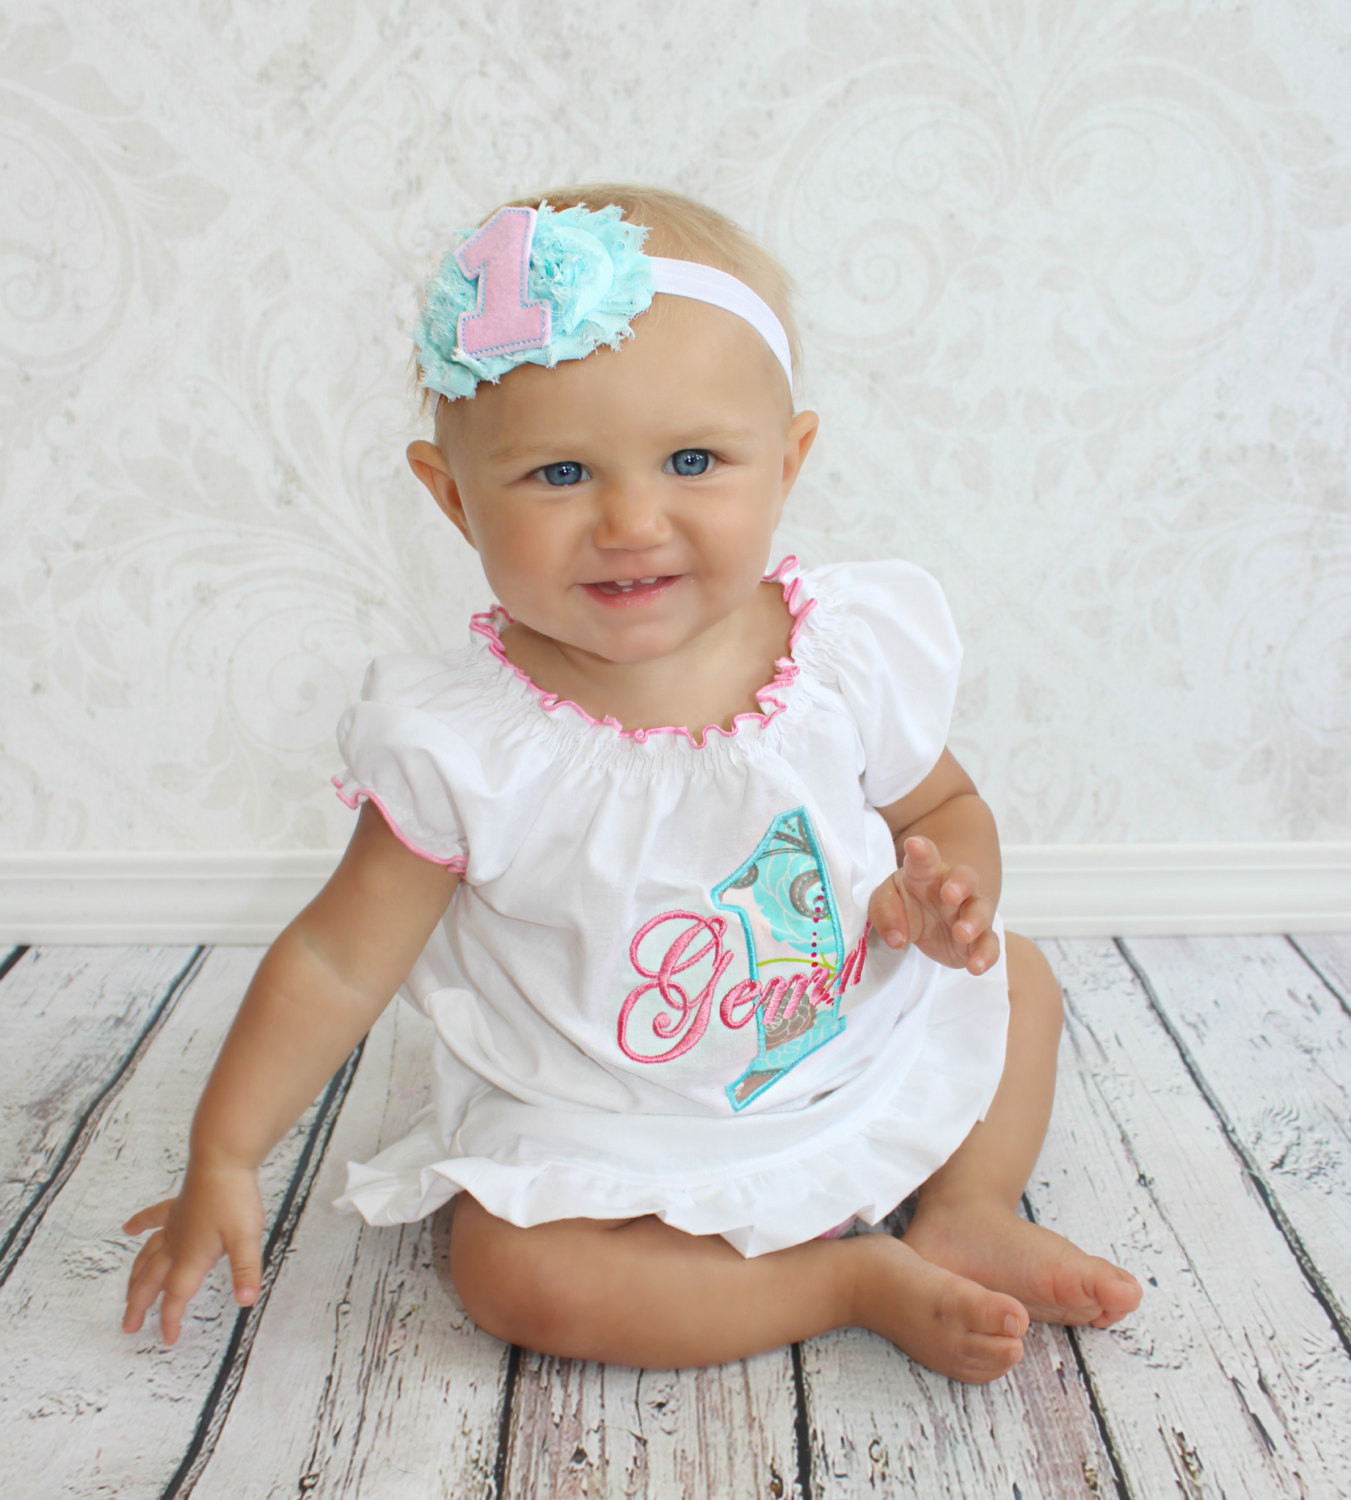 1St Birthday Party Dress For Baby Girl
 First Birthday Outfit Girl Baby Girl 1st Birthday Outfit 1st